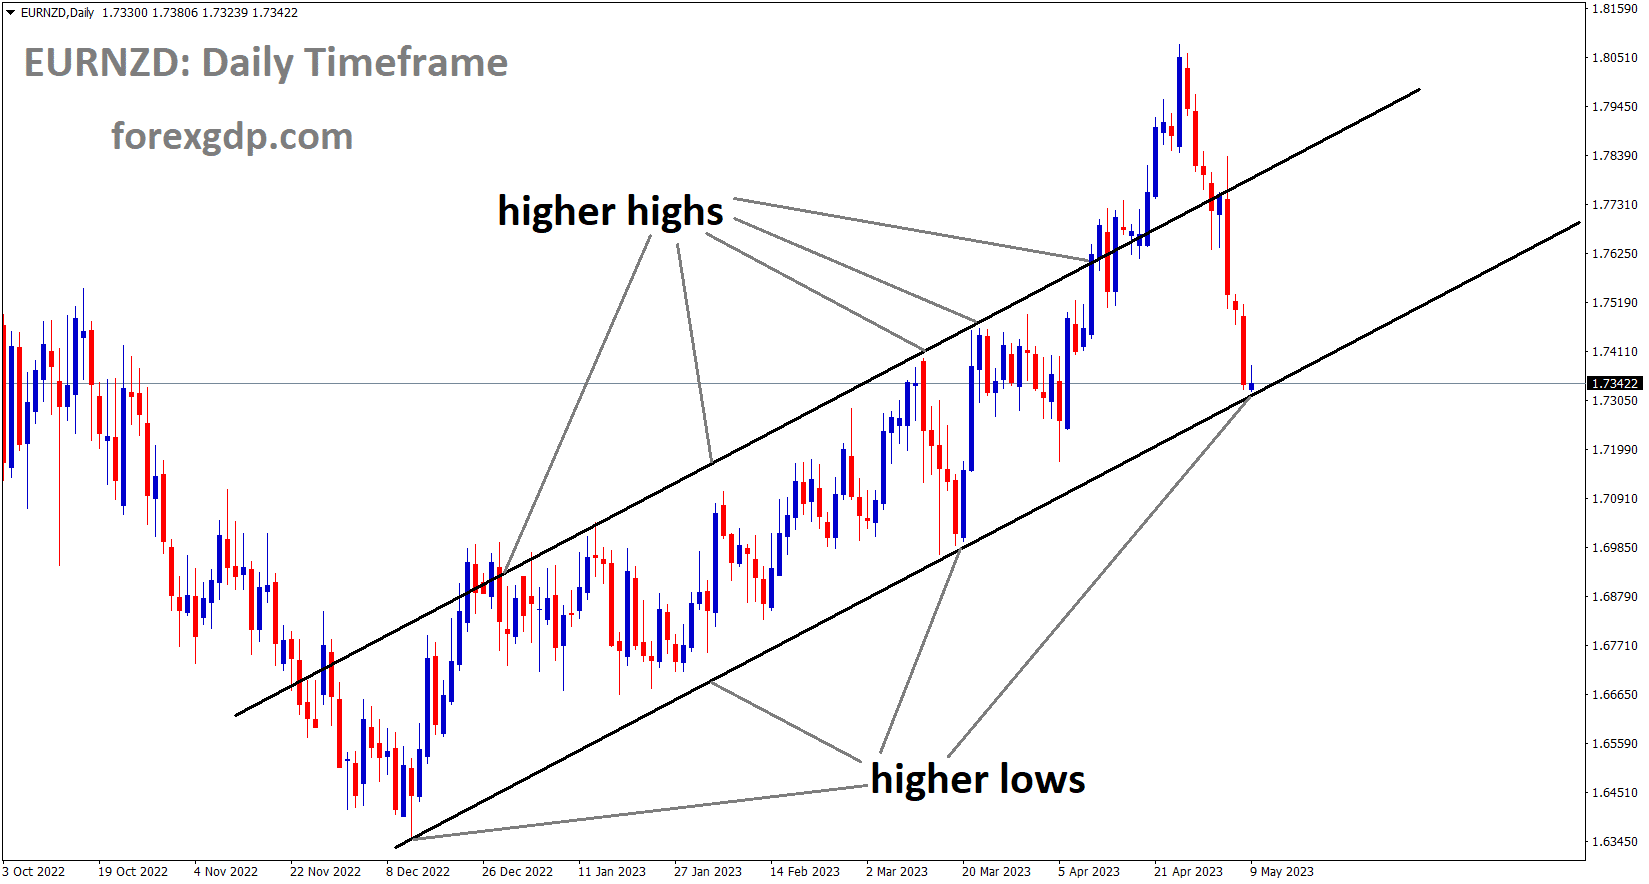 EURNZD is moving in an Ascending channel and the market has reached the higher low area of the channel